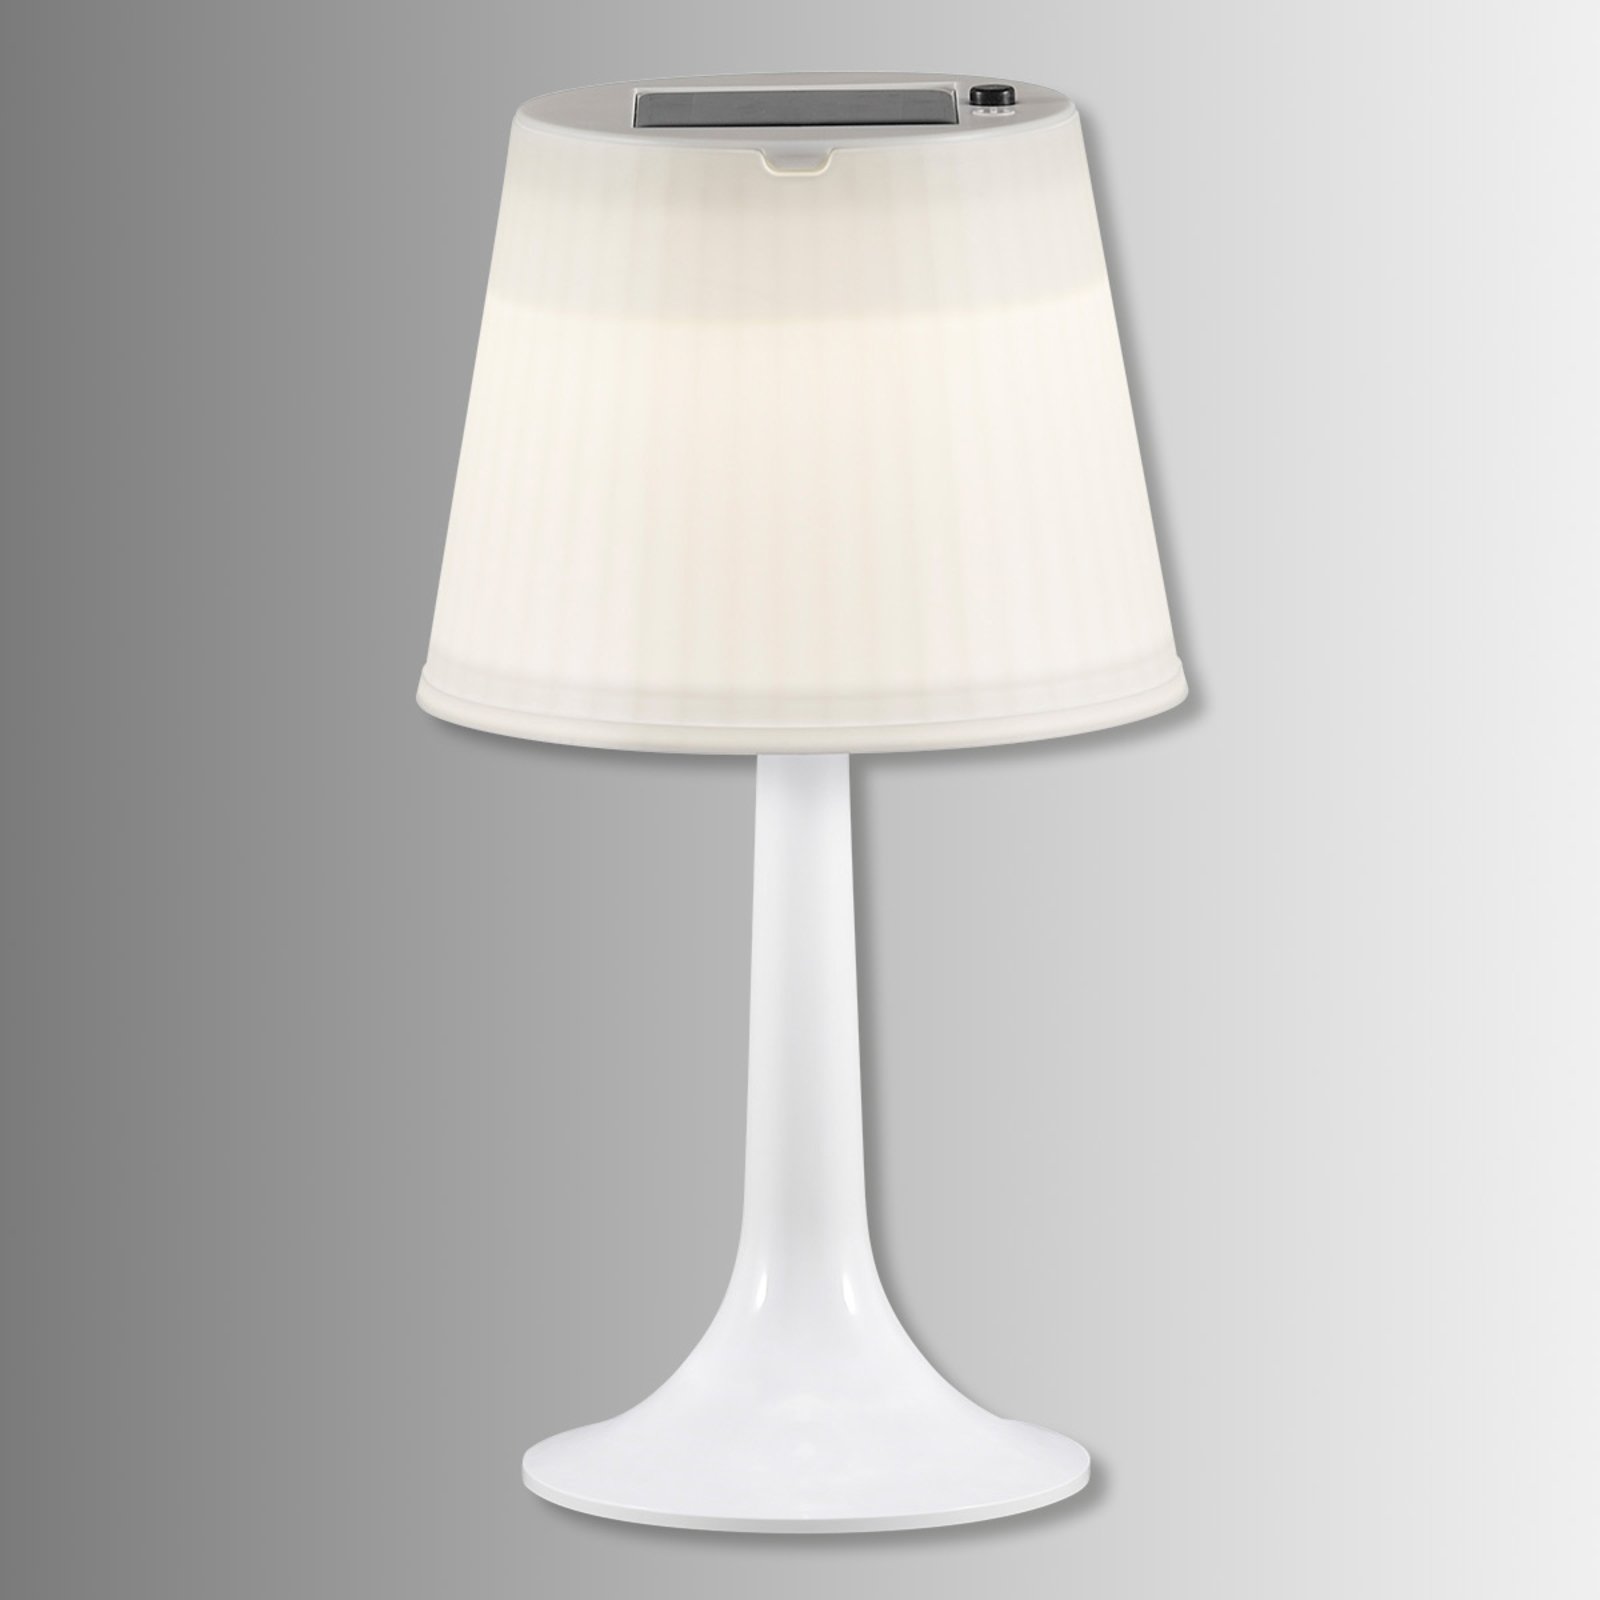 White Assisi Sitra LED solar table lamp